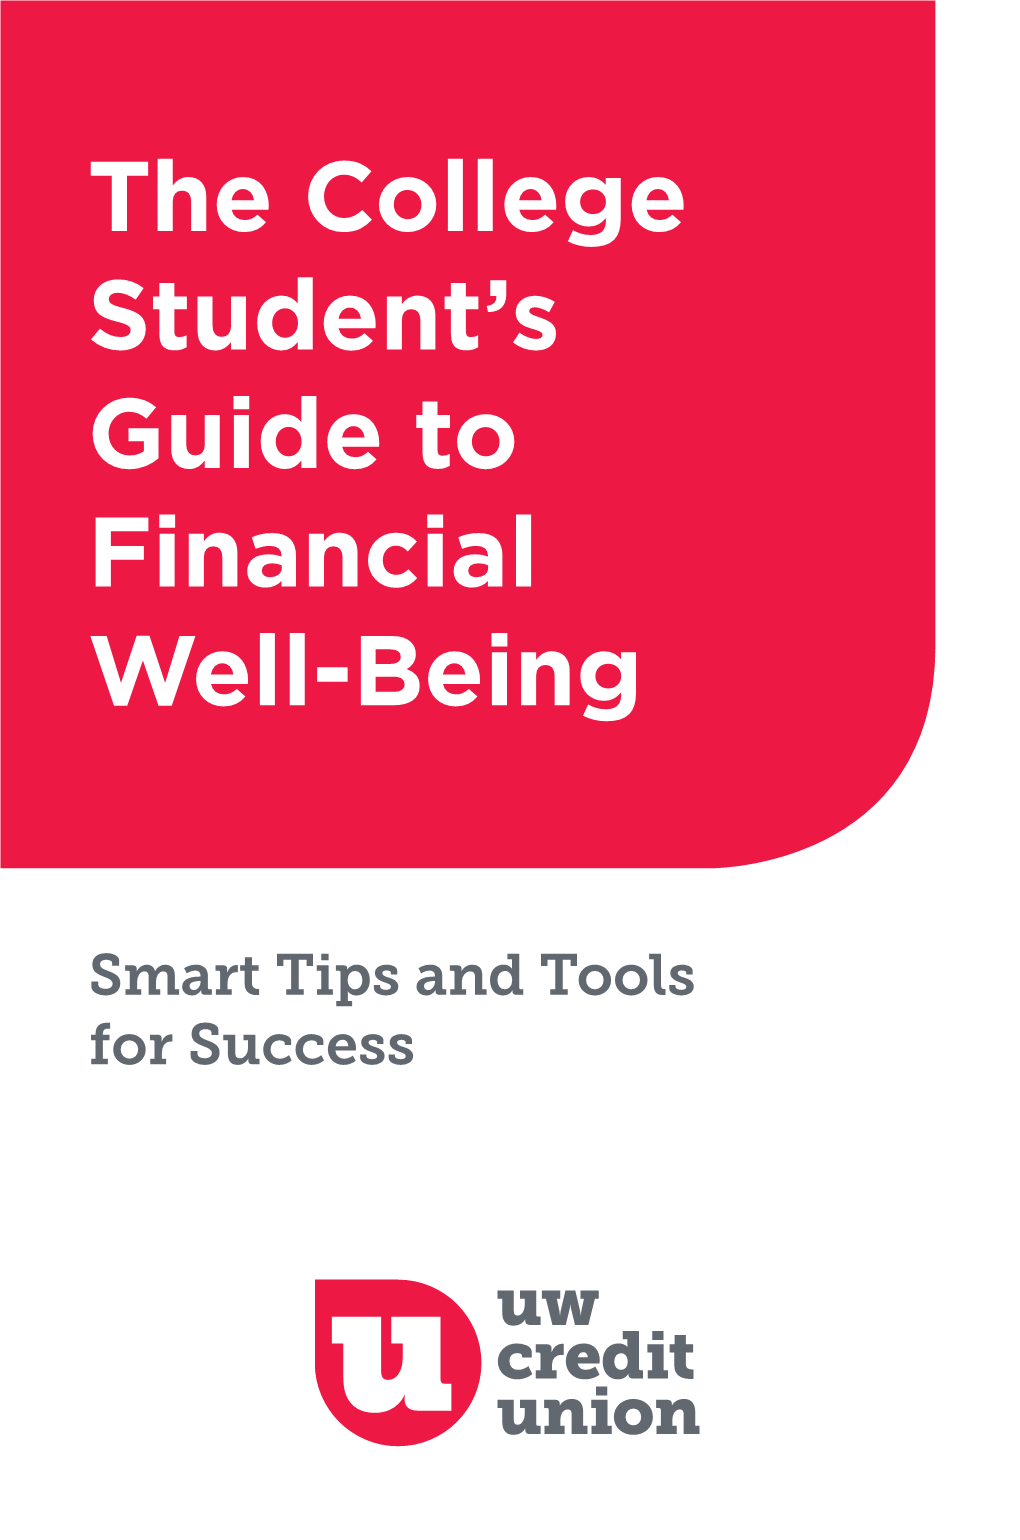 The College Student's Guide to Financial Well-Being